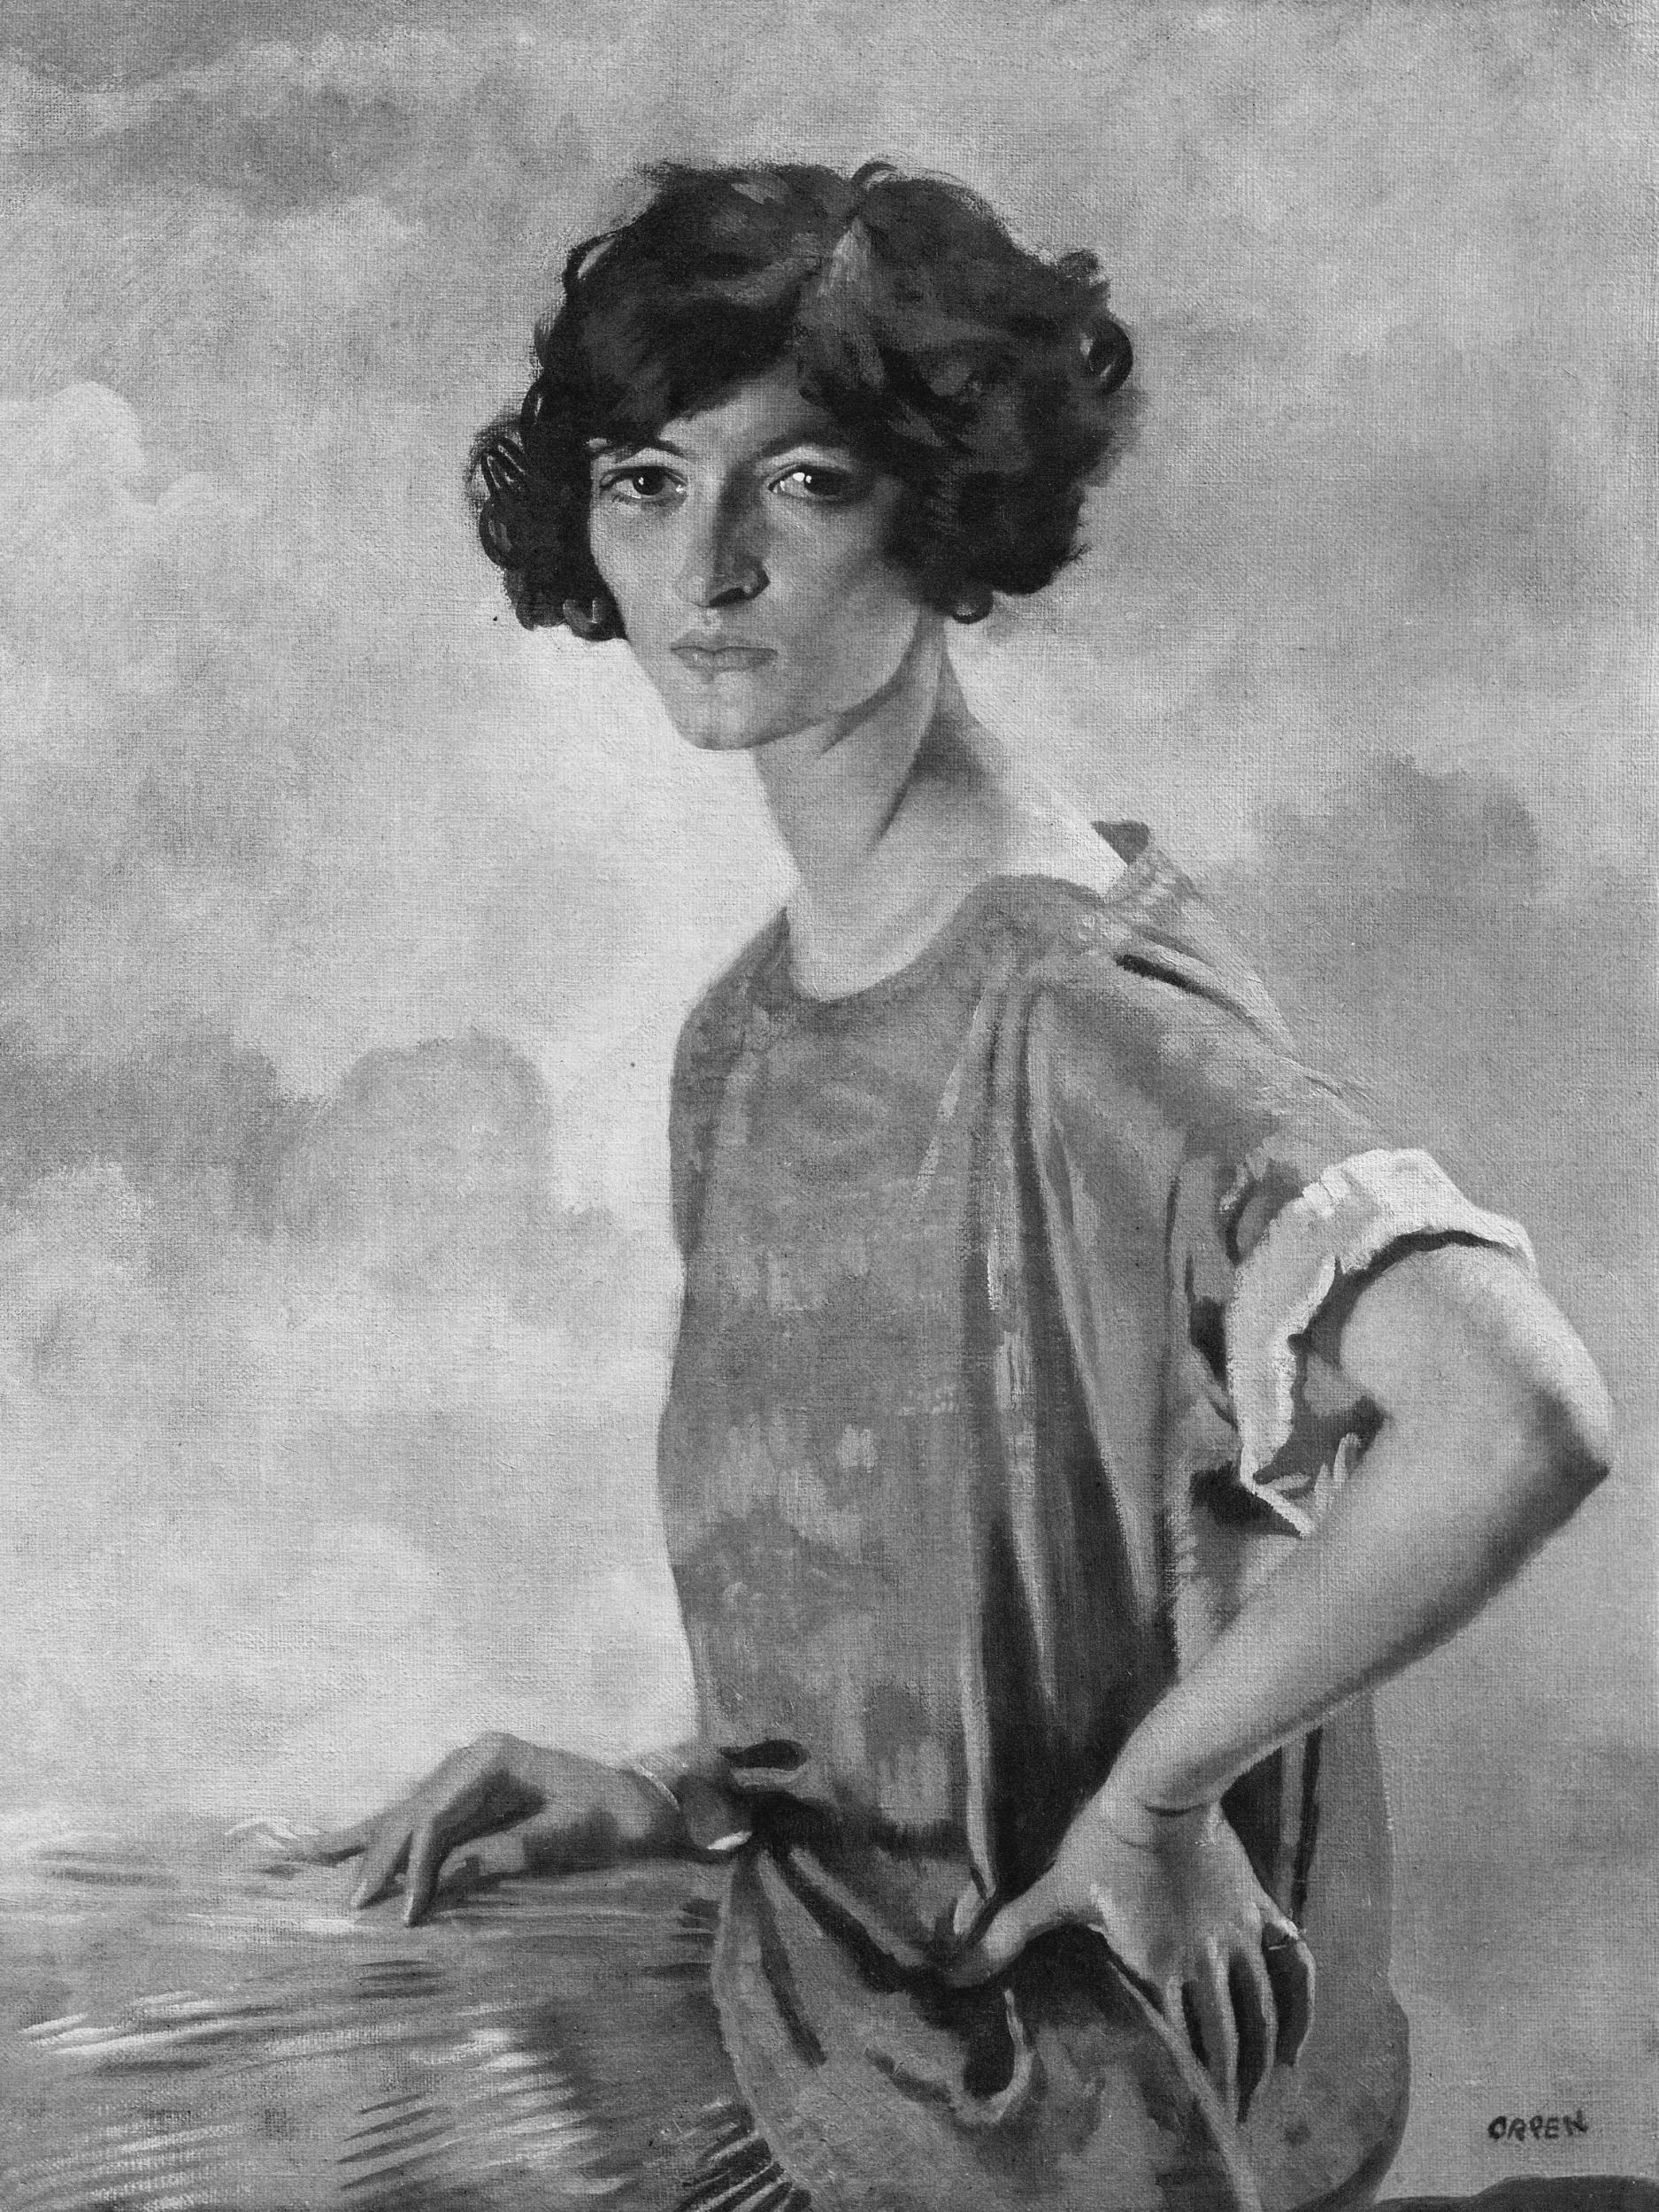 A portrait of Gertie by artist William Orpen hung at Medway, her South Carolina plantation